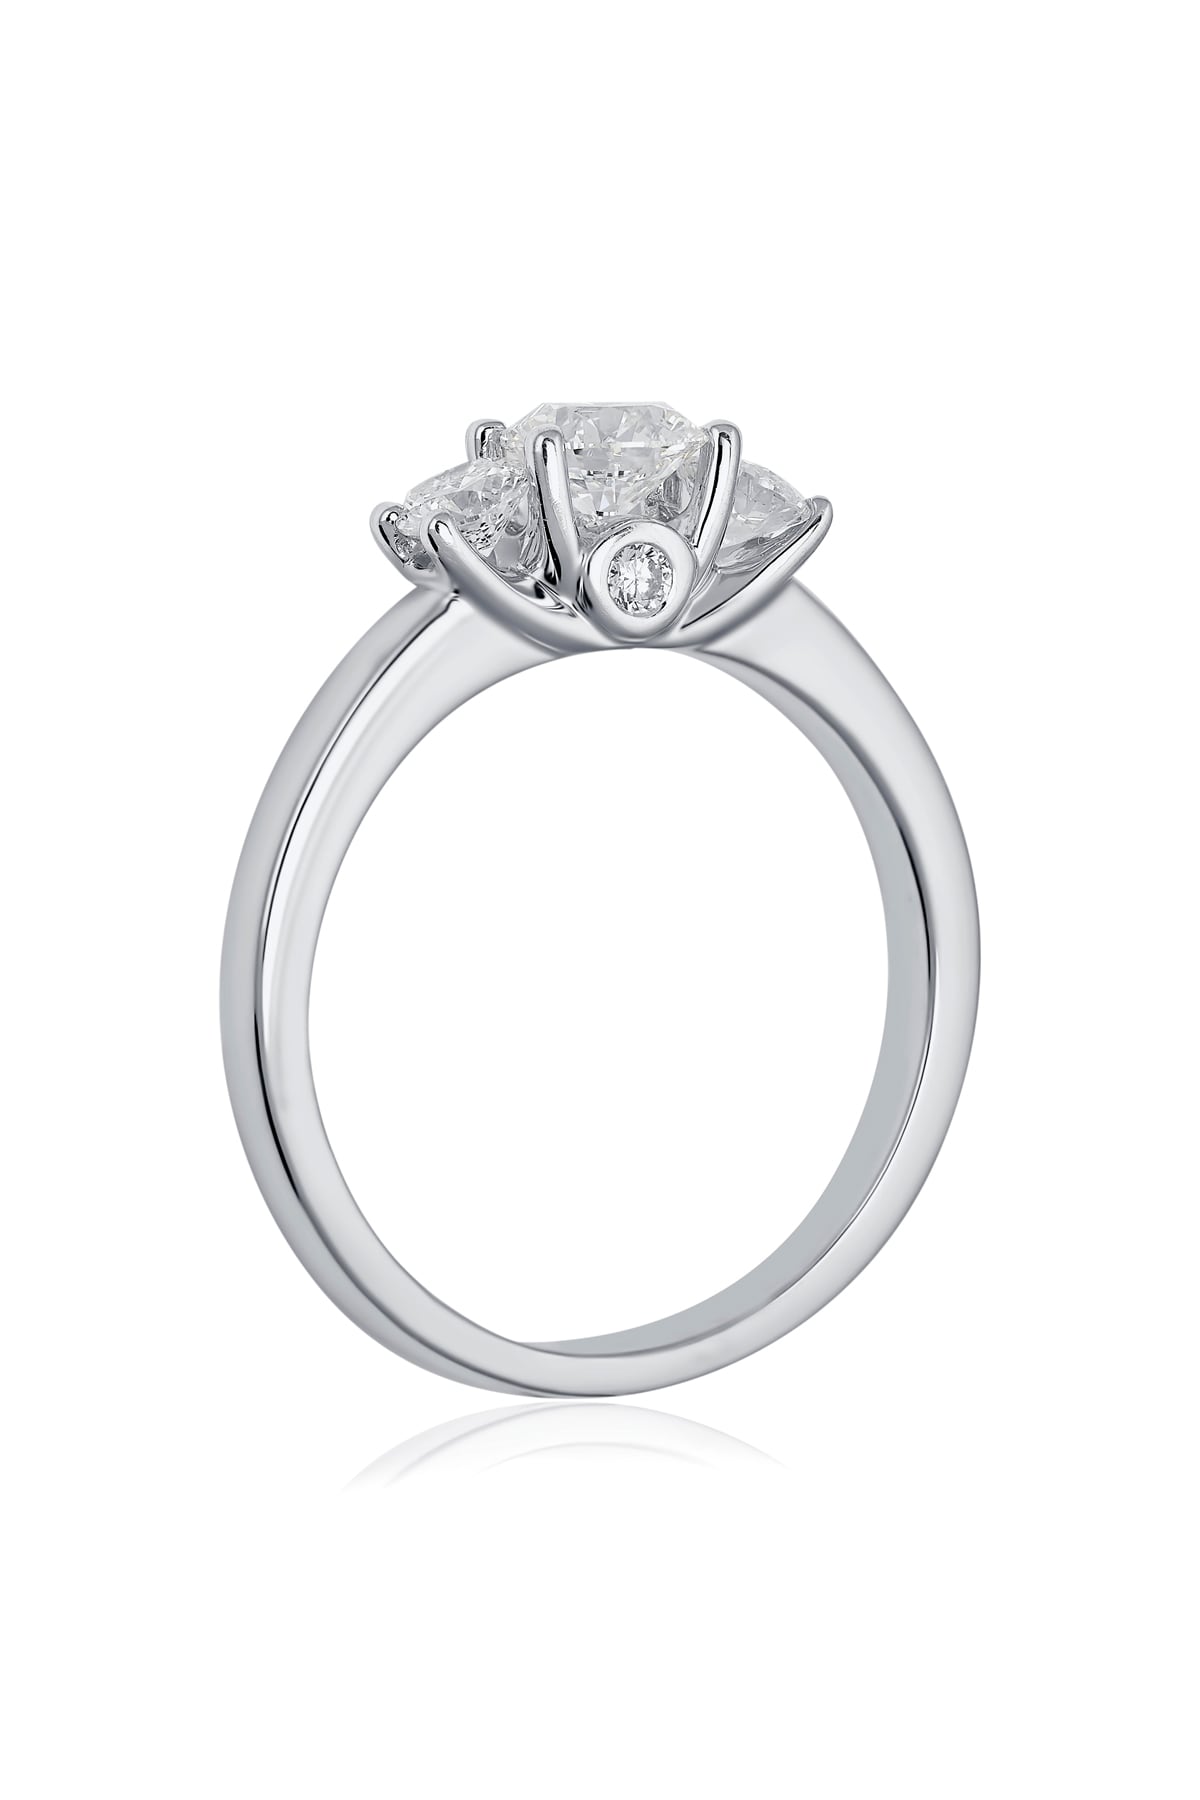 Three Stone Diamond Engagement Ring in White Gold from LeGassick.